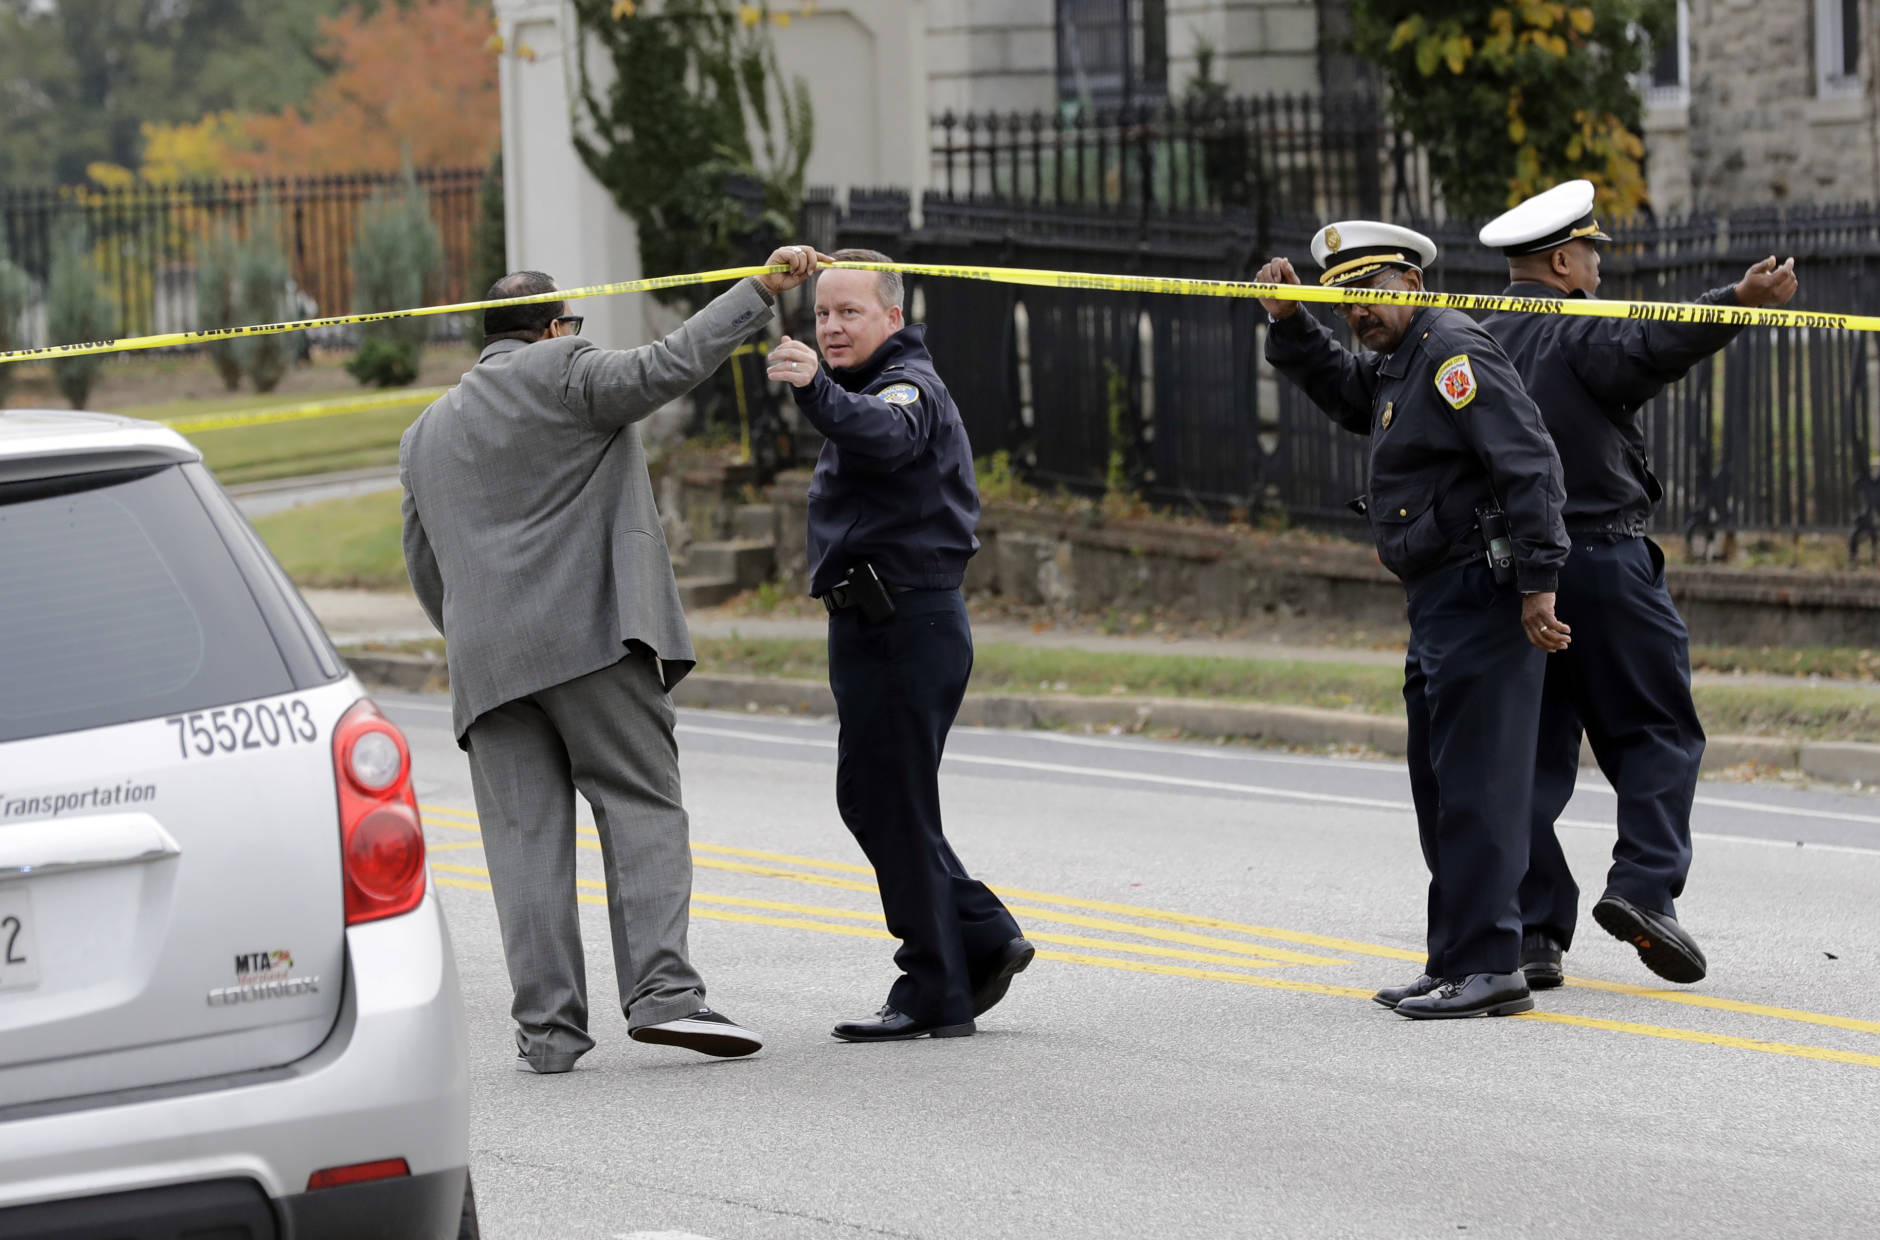 Baltimore Police Department commissioner Kevin Davis, second from left, approaches the scene of an early morning fatal collision between a school bus and a commuter bus in Baltimore, Tuesday, Nov. 1, 2016.  Baltimore police spokesman T.J. Smith said the school bus rear ended a car Tuesday morning, then struck a pillar at a cemetery and veered into oncoming traffic, hitting the Maryland Transit Administration bus on the driver's side.  (AP Photo/Patrick Semansky)